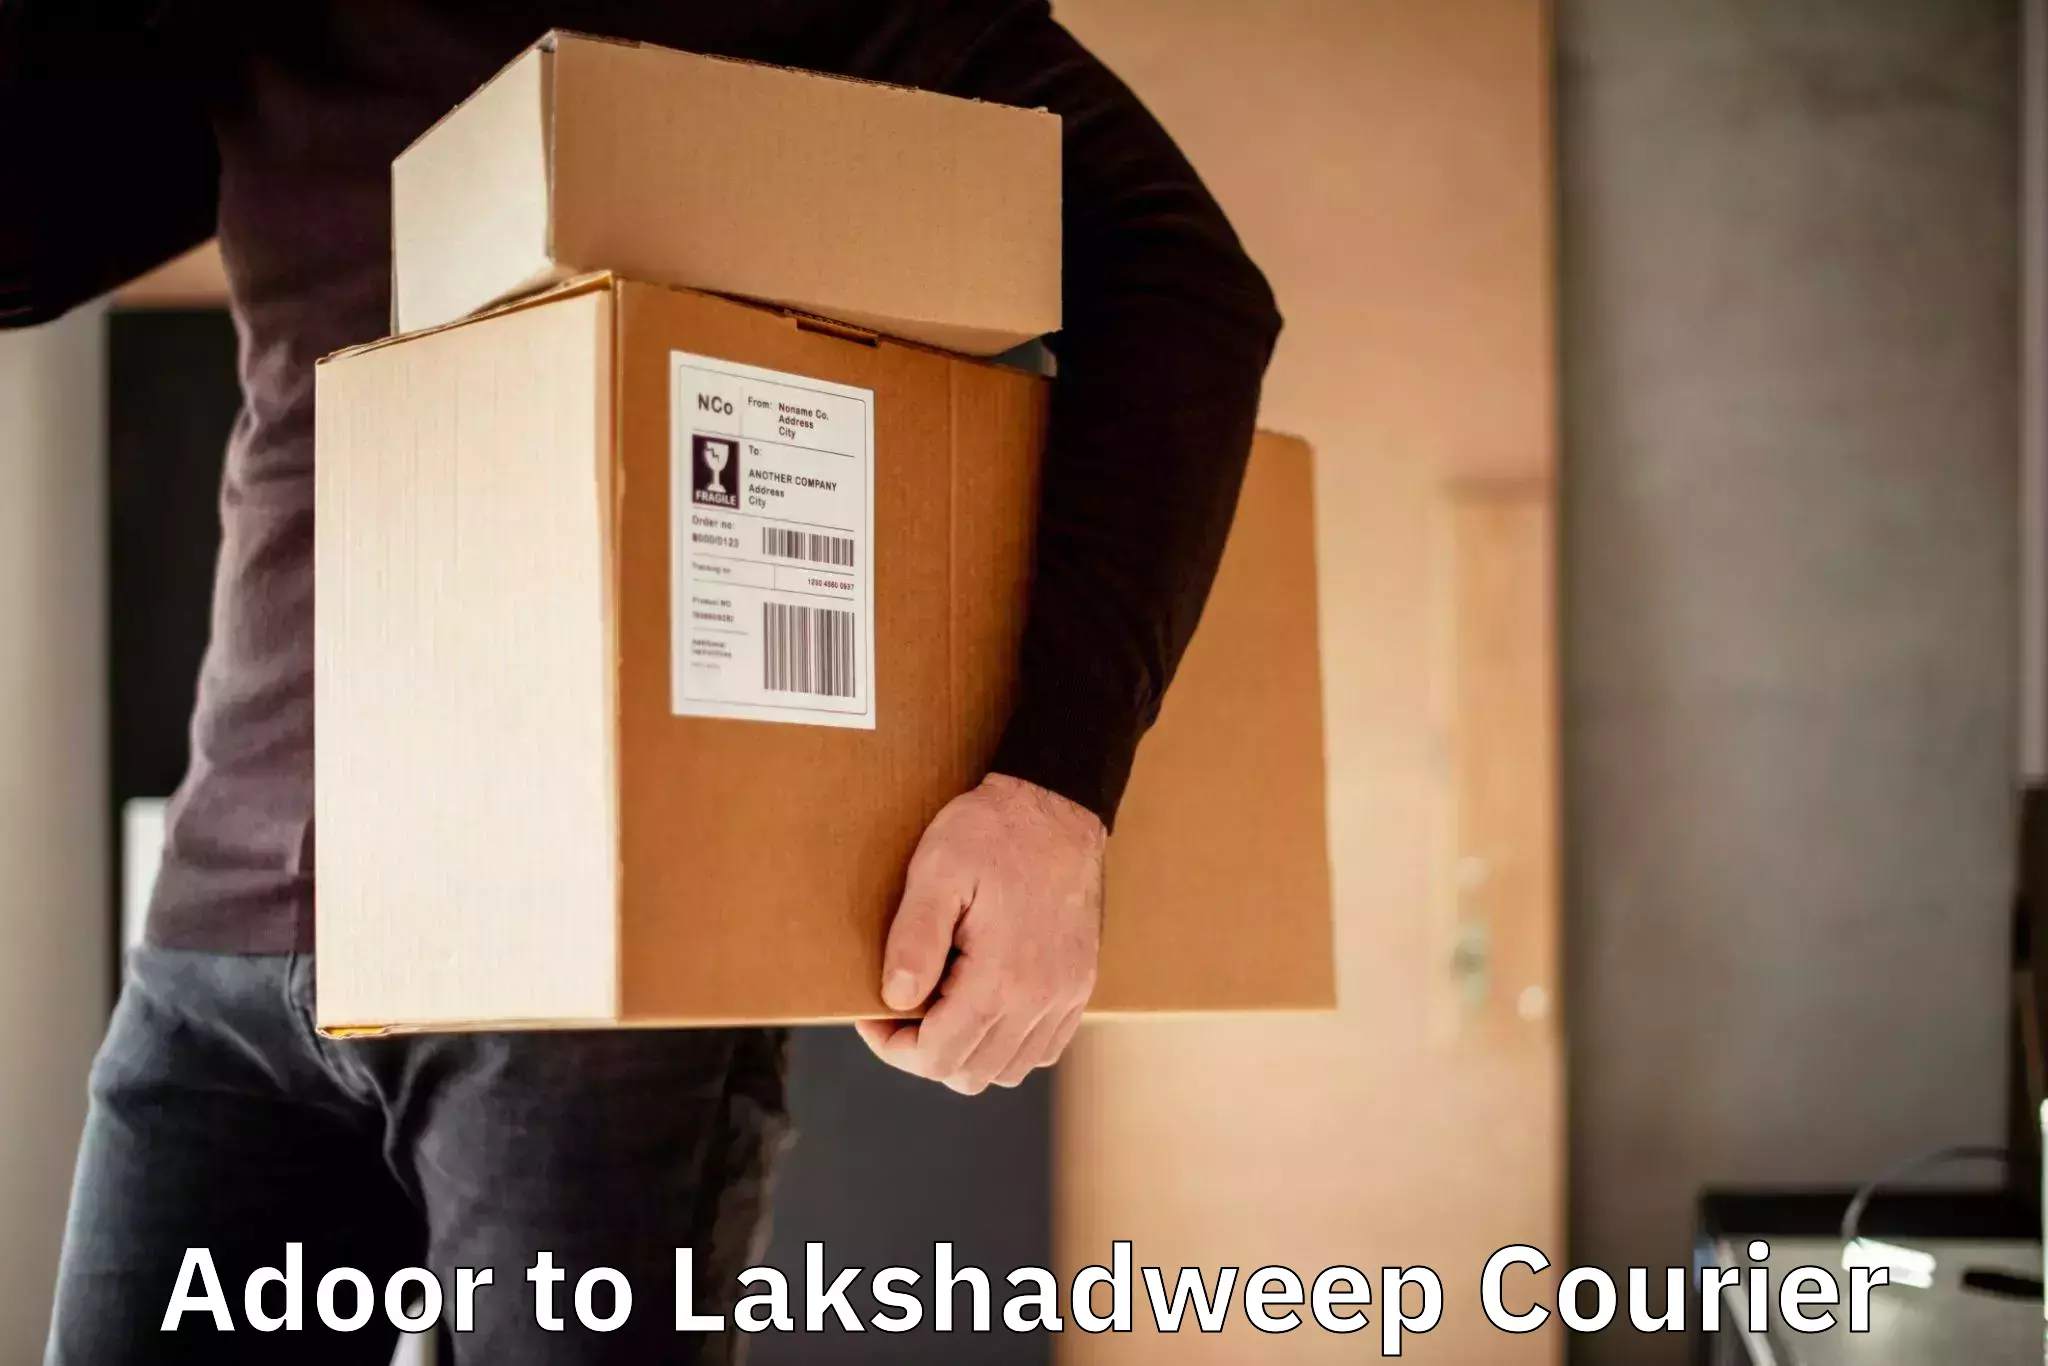 Nationwide courier service Adoor to Lakshadweep